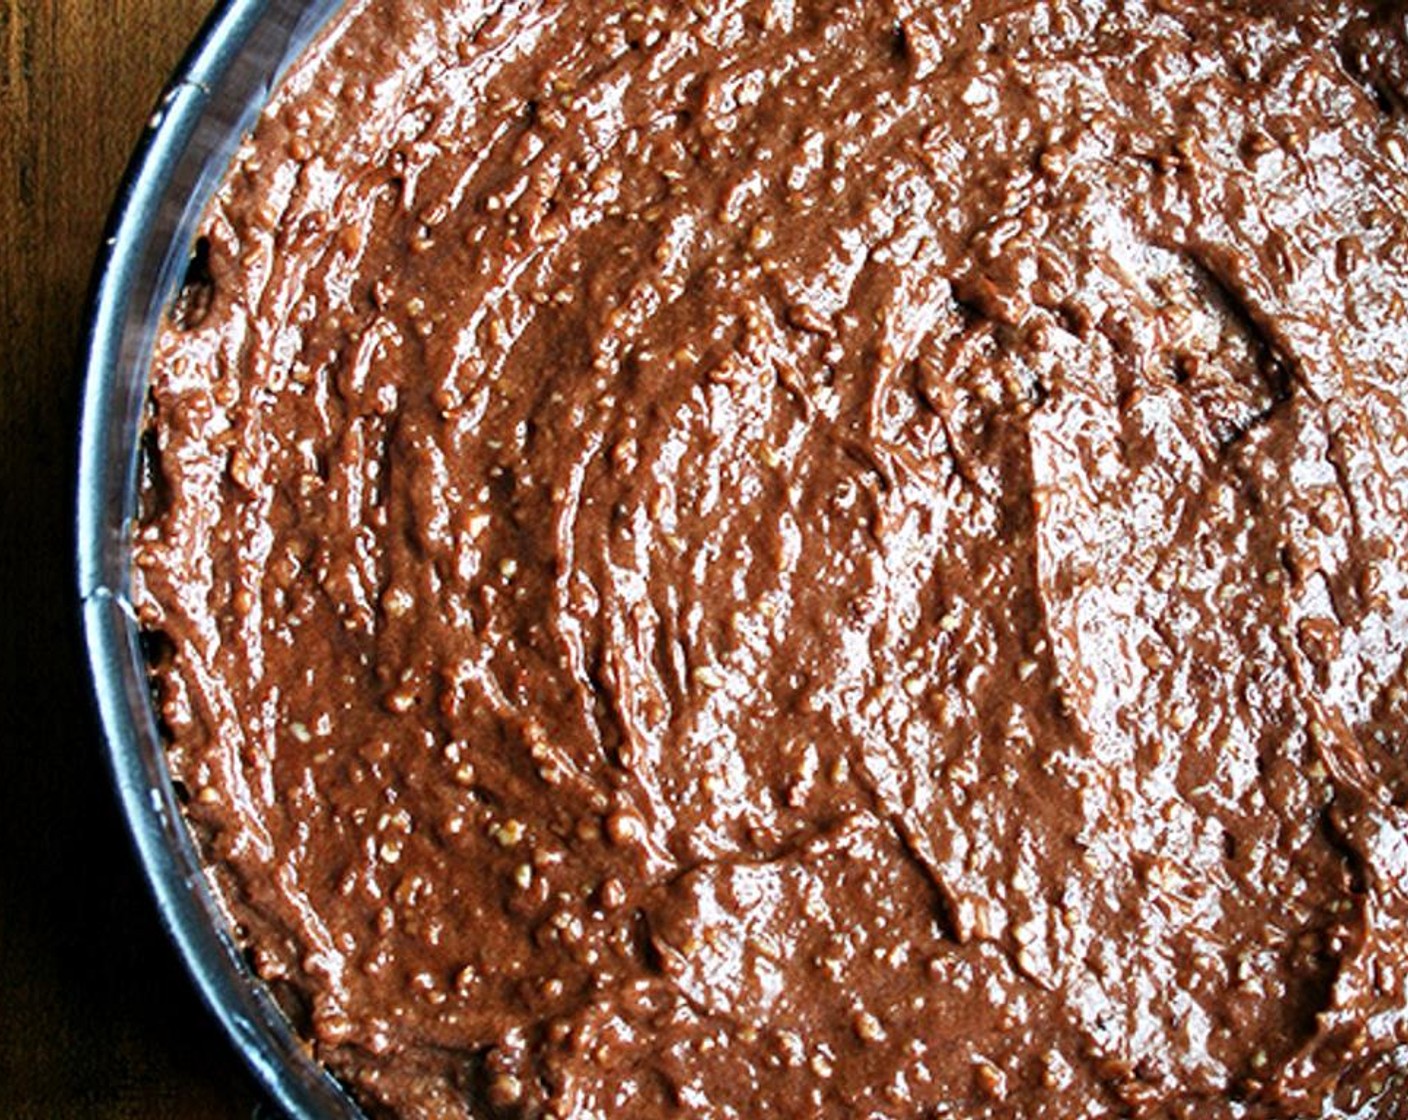 step 9 Pour the batter into the prepared cake pan and smooth the top. Put the pan on a cookie sheet and bake for 90 minutes.